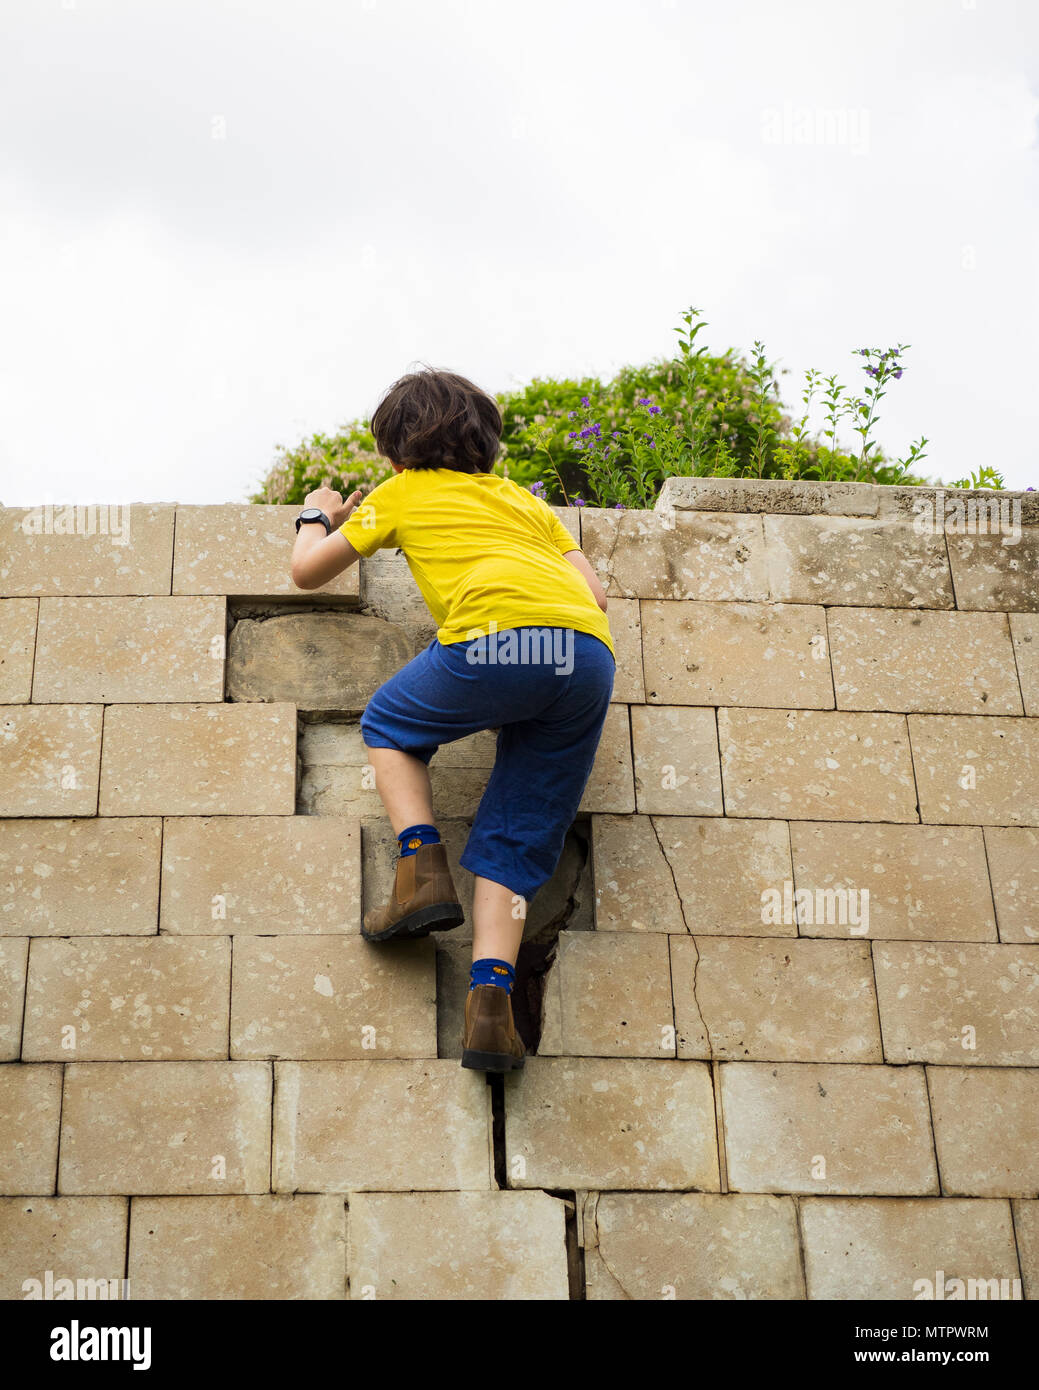 Young boy of ten climbs on a wall. Humpty Dumpty sat on a wall, Humpty Dumpty had a great fall All the king’s horses and all the king’s men Couldn’t p Stock Photo